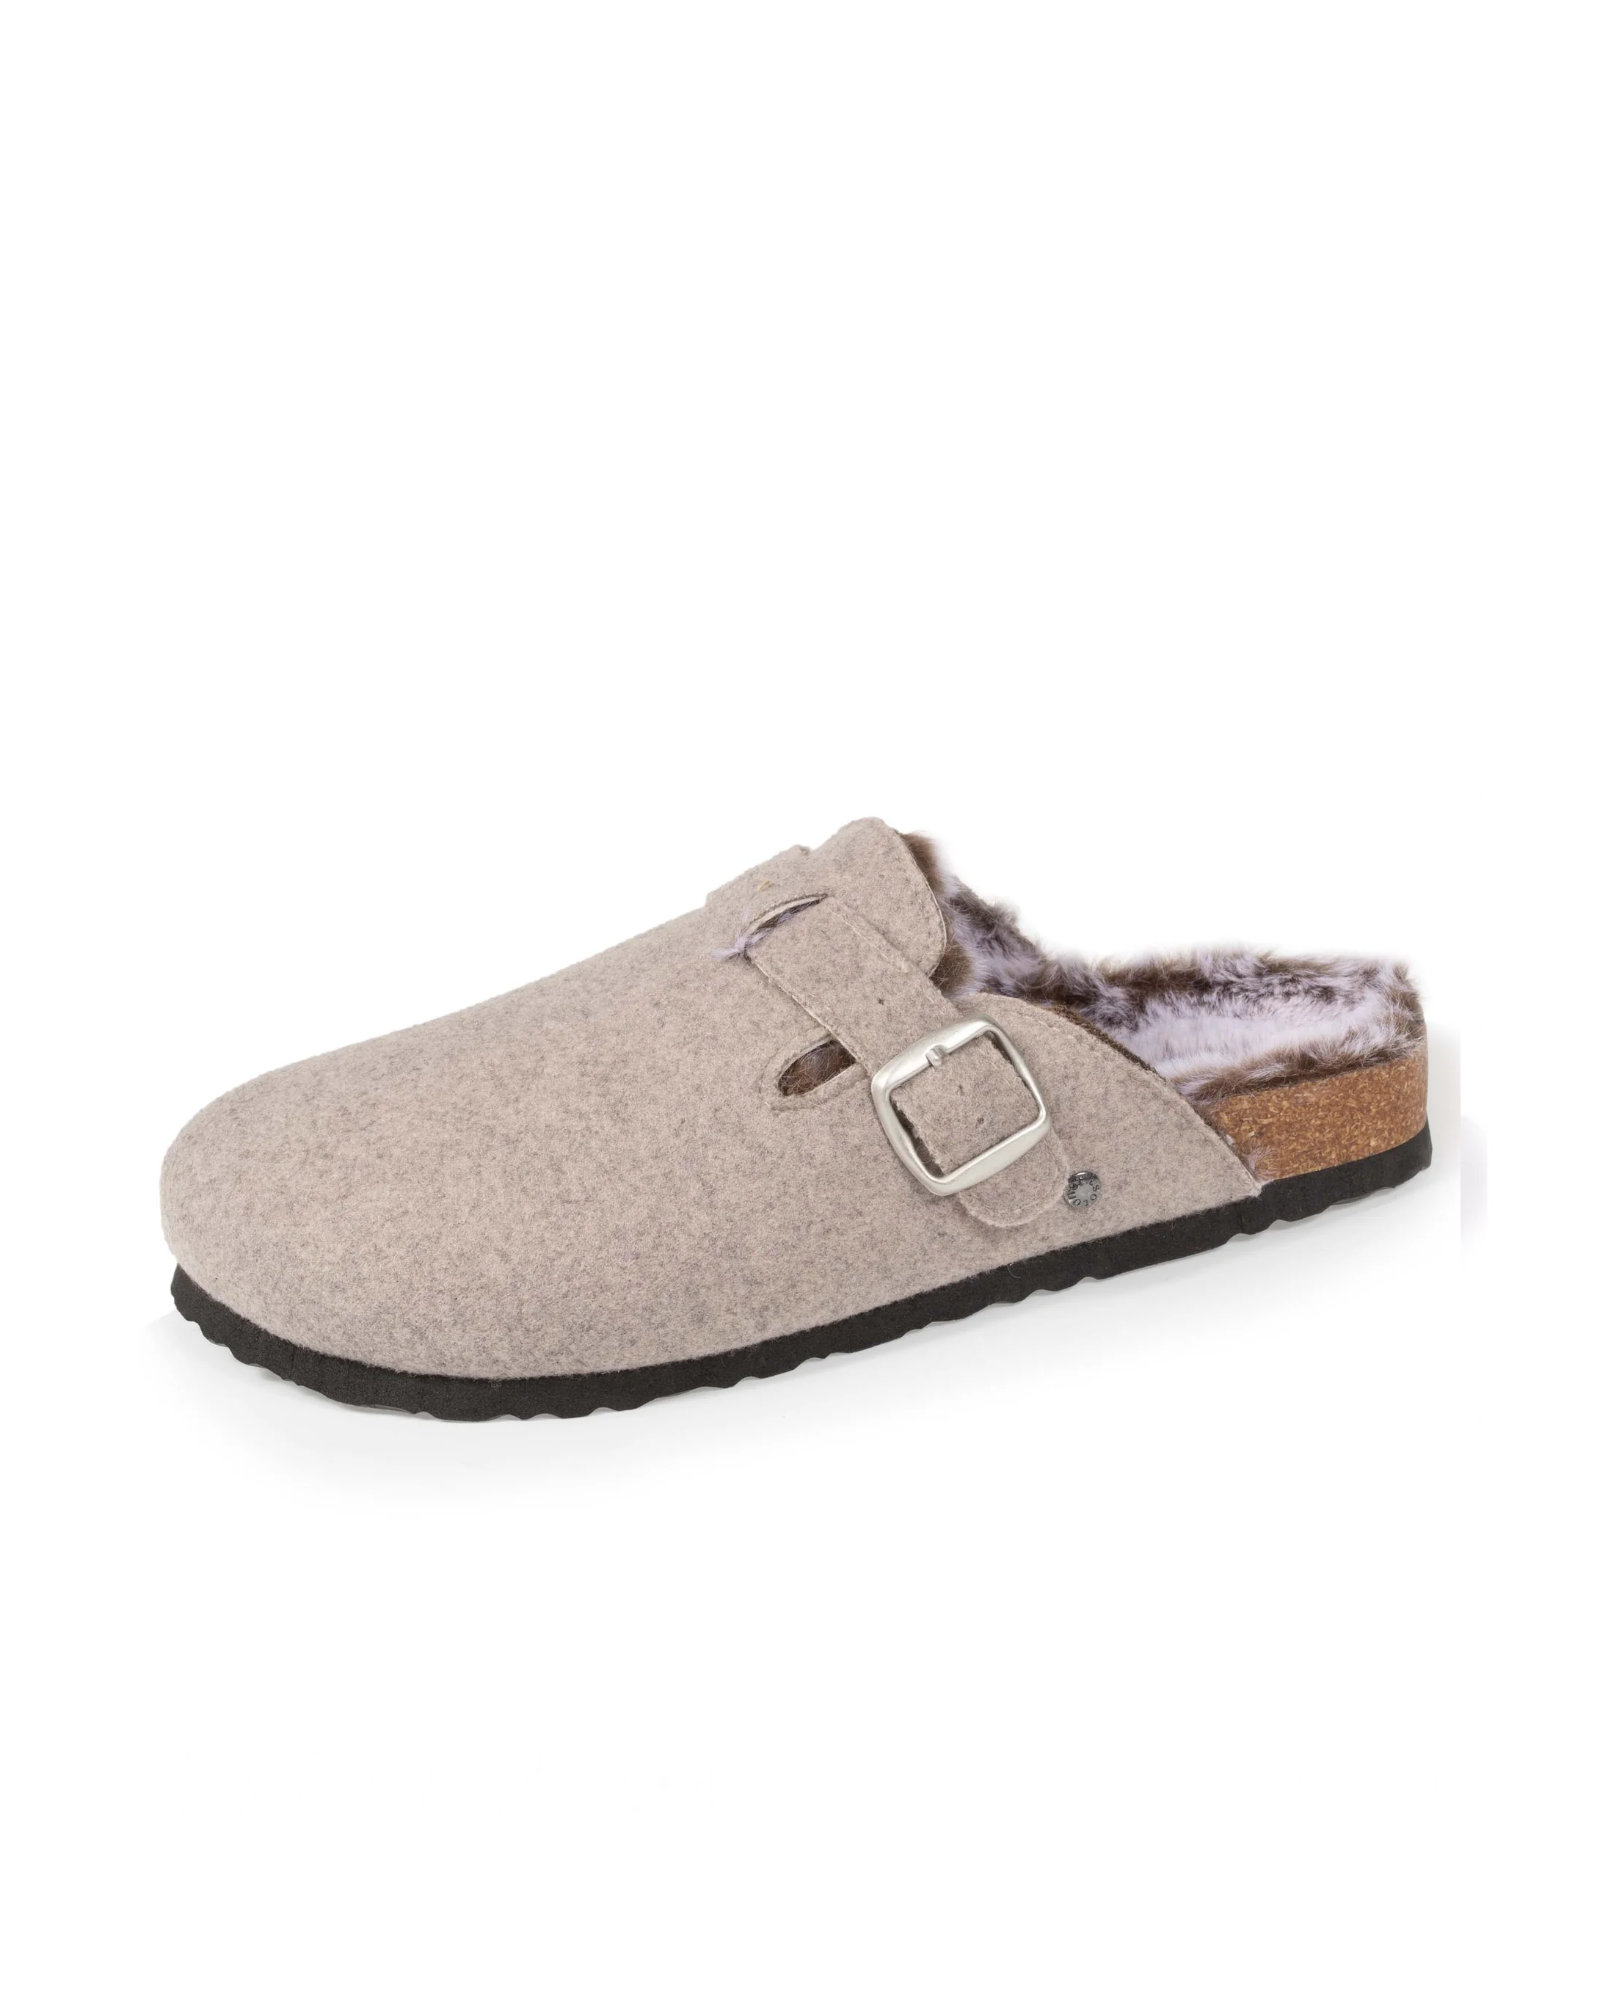 Isotoner - Pantoffels MULES Taupe Chiné - 39 - Taupe Chiné